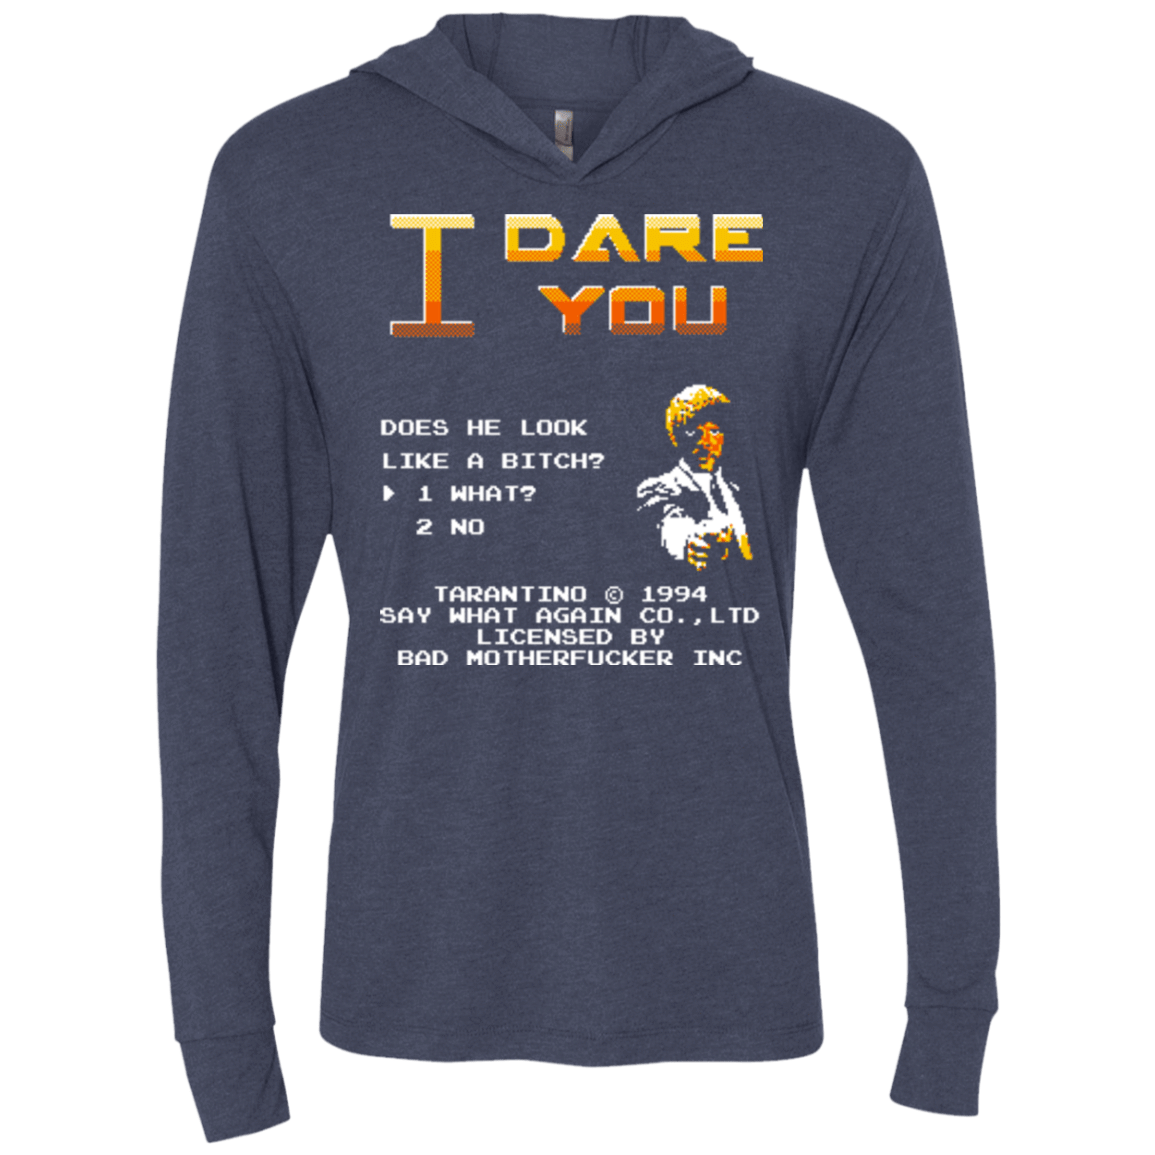 T-Shirts Vintage Navy / X-Small I Dare you Triblend Long Sleeve Hoodie Tee